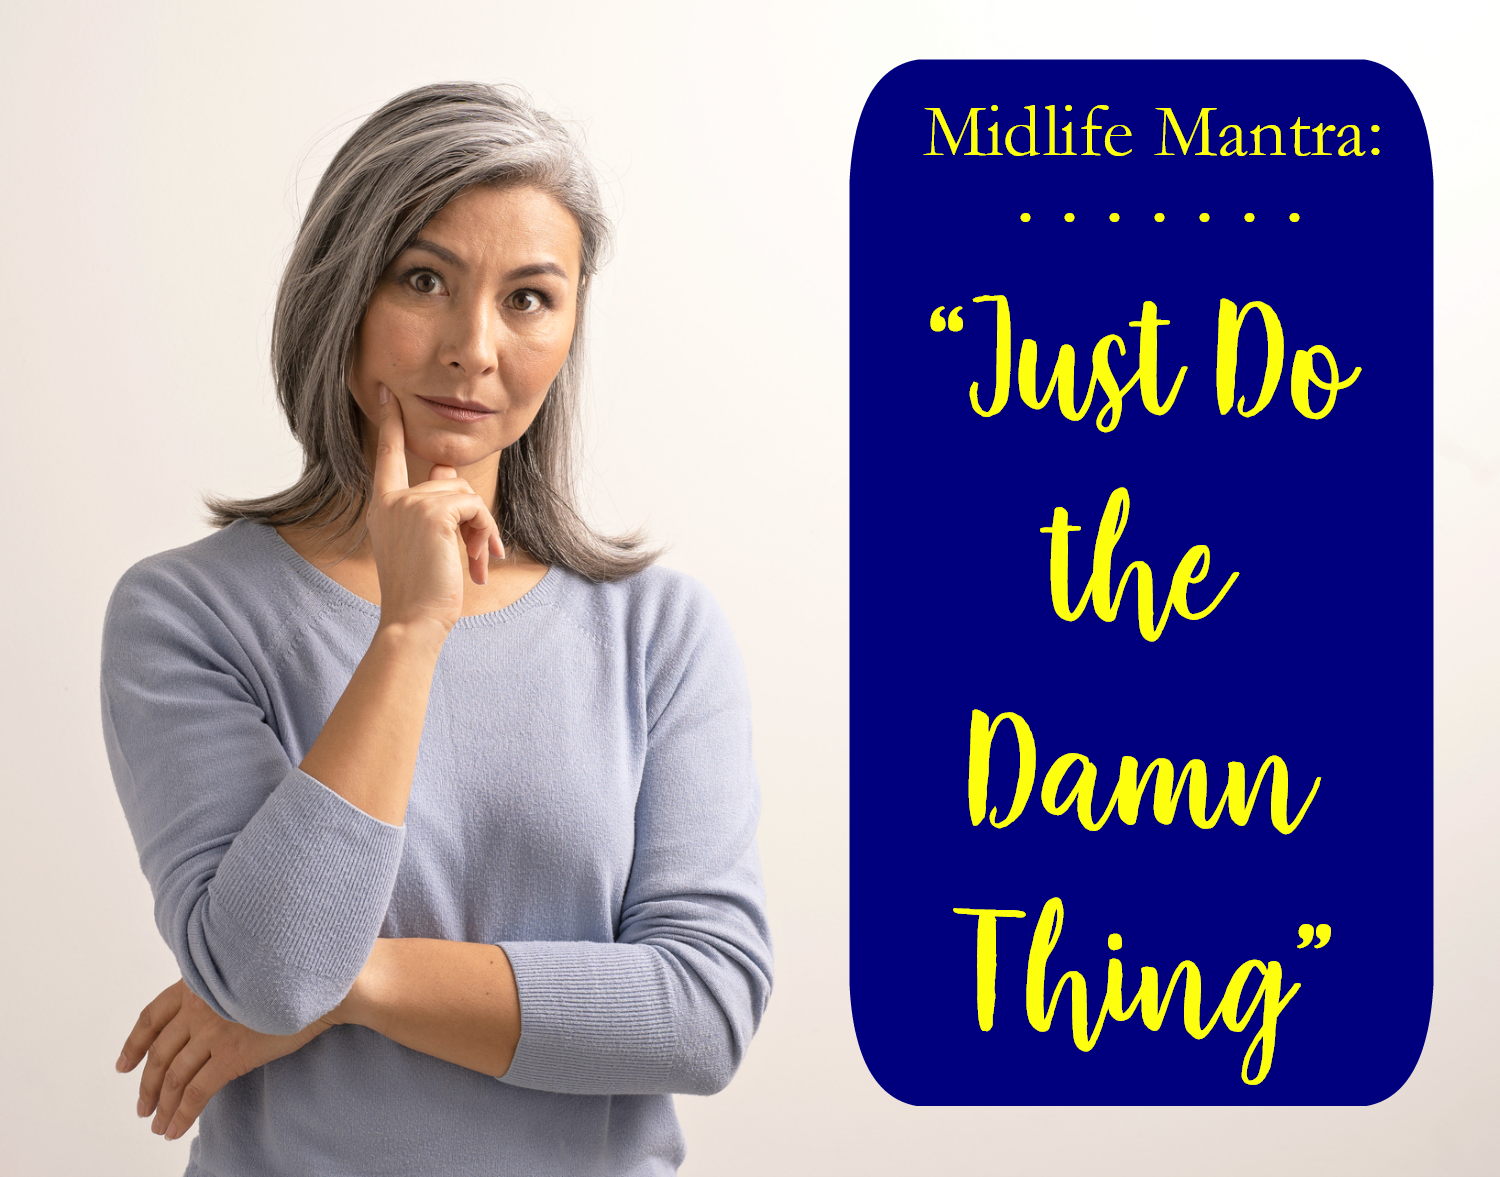 MIDLIFE MANTRA: Just Do the Damn Thing